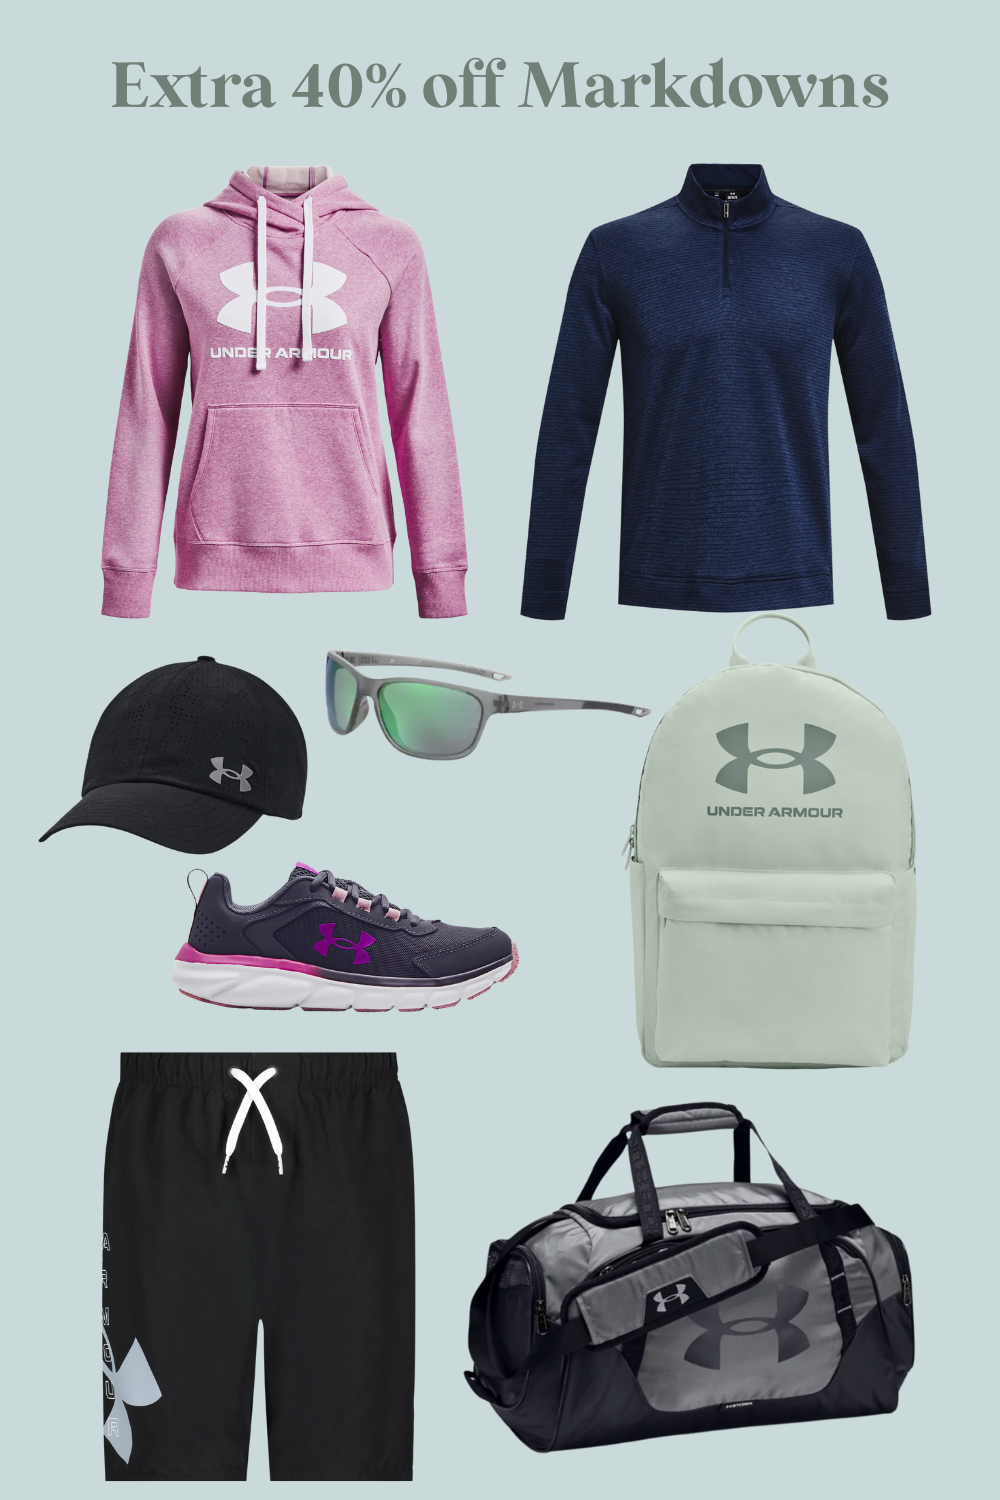 Under Armour Extra 30% off Markdowns